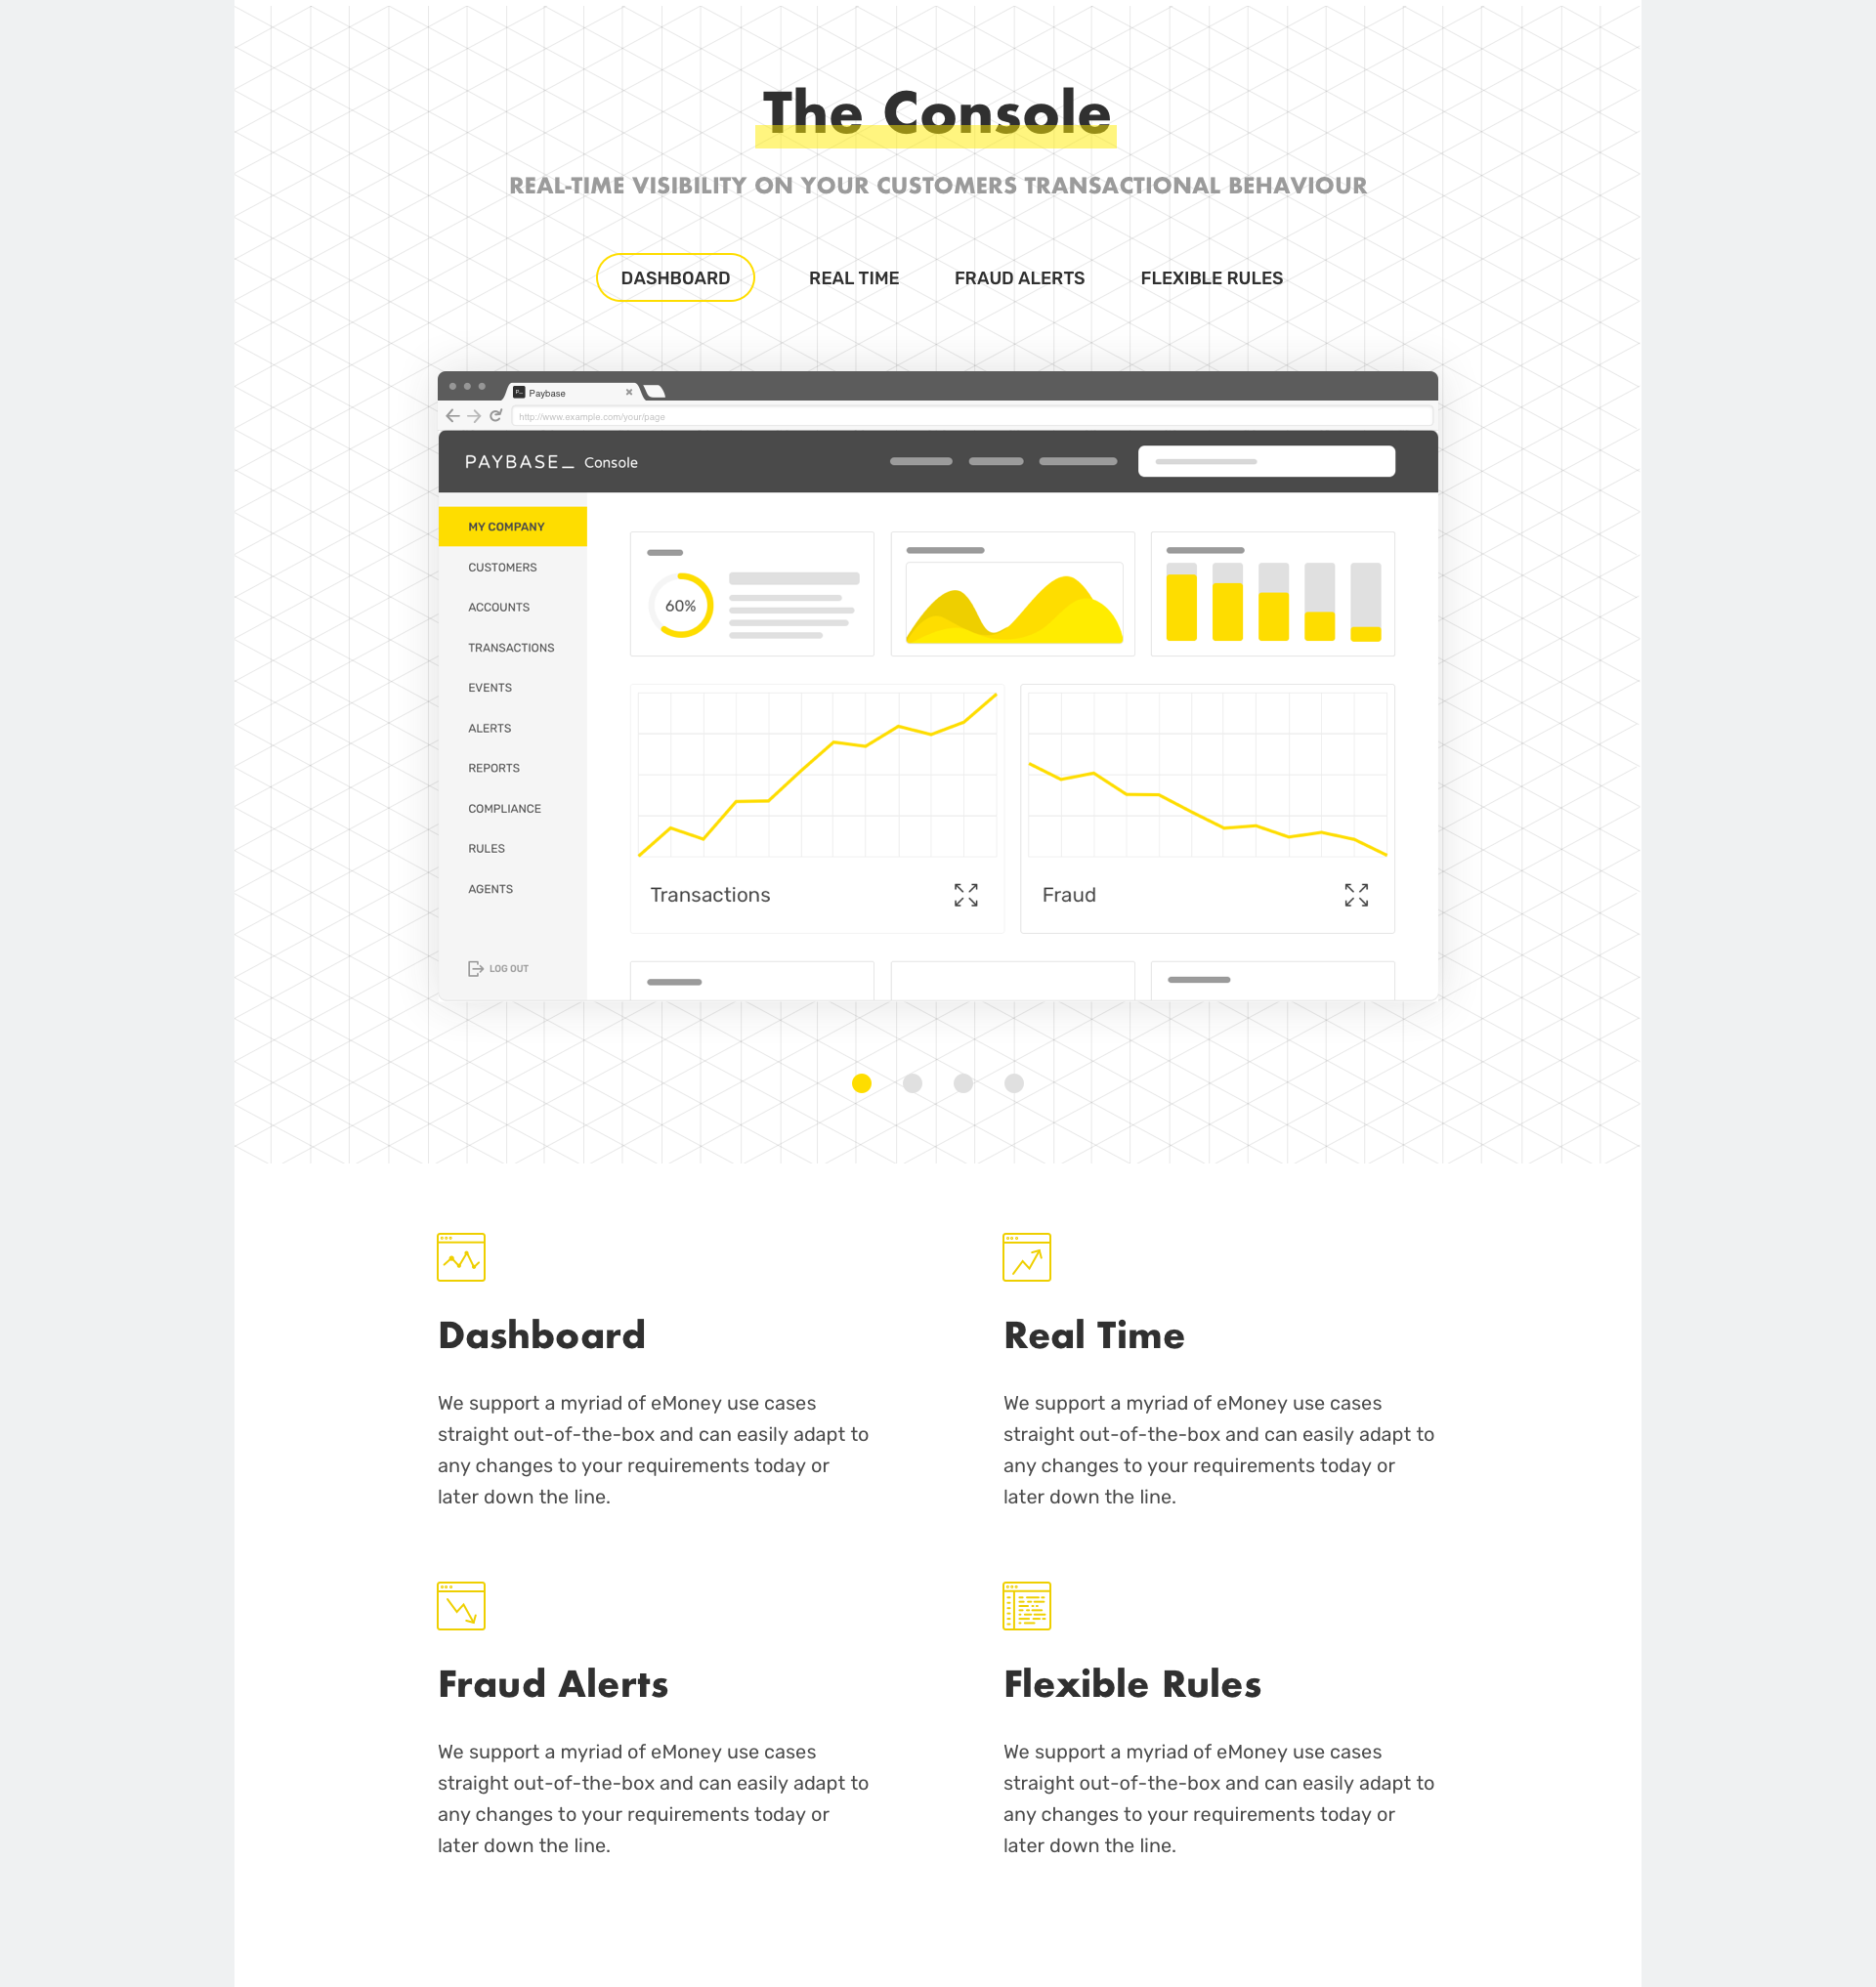 Paybase-Website-Console-Full